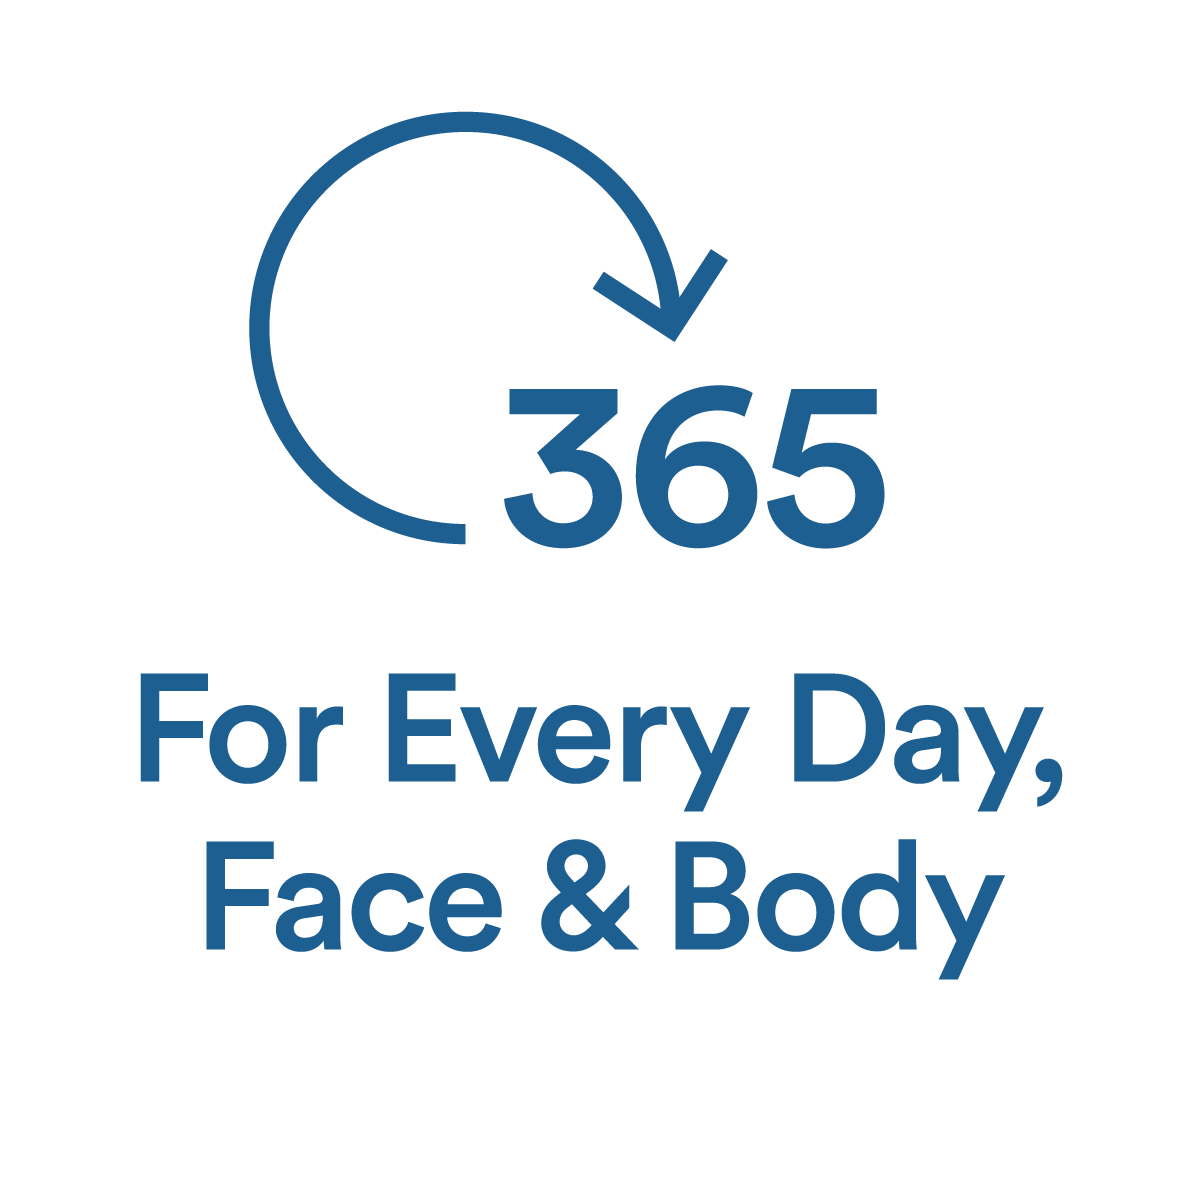 For every day, face and body